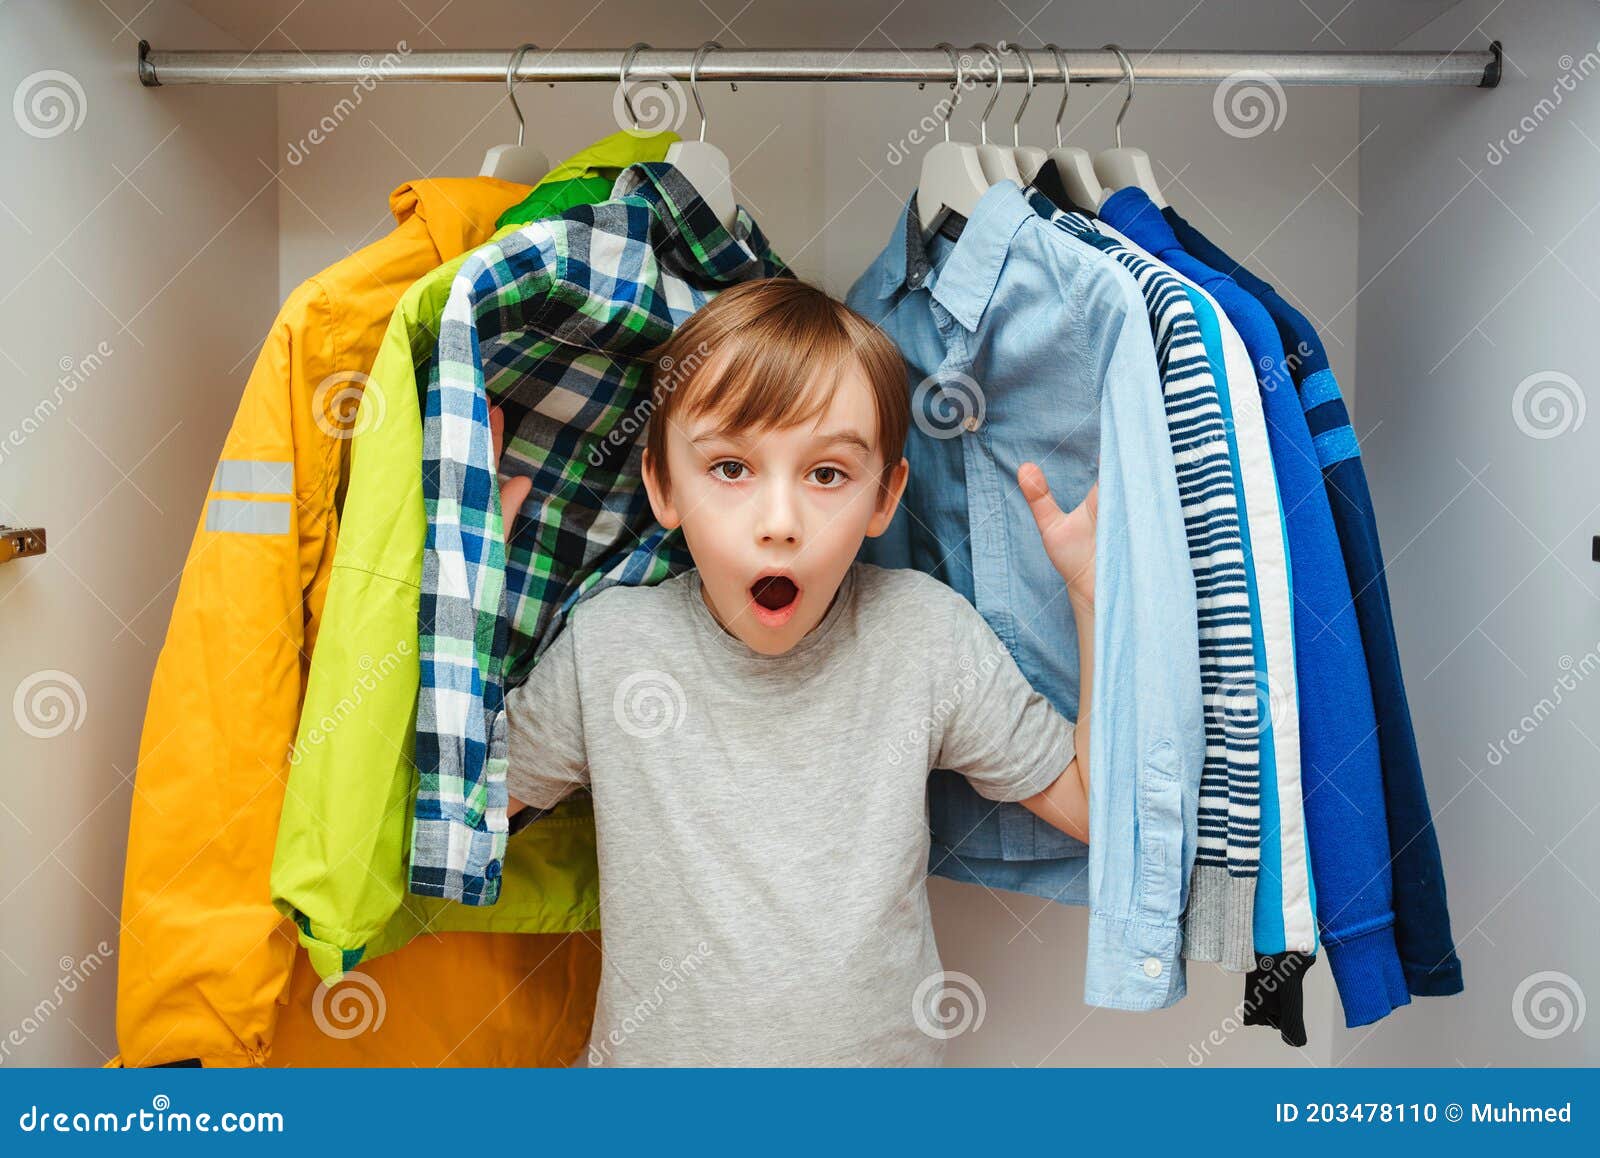 Surprised Cute Boy Searching for Clothing in a Closet. Preteen Boy ...